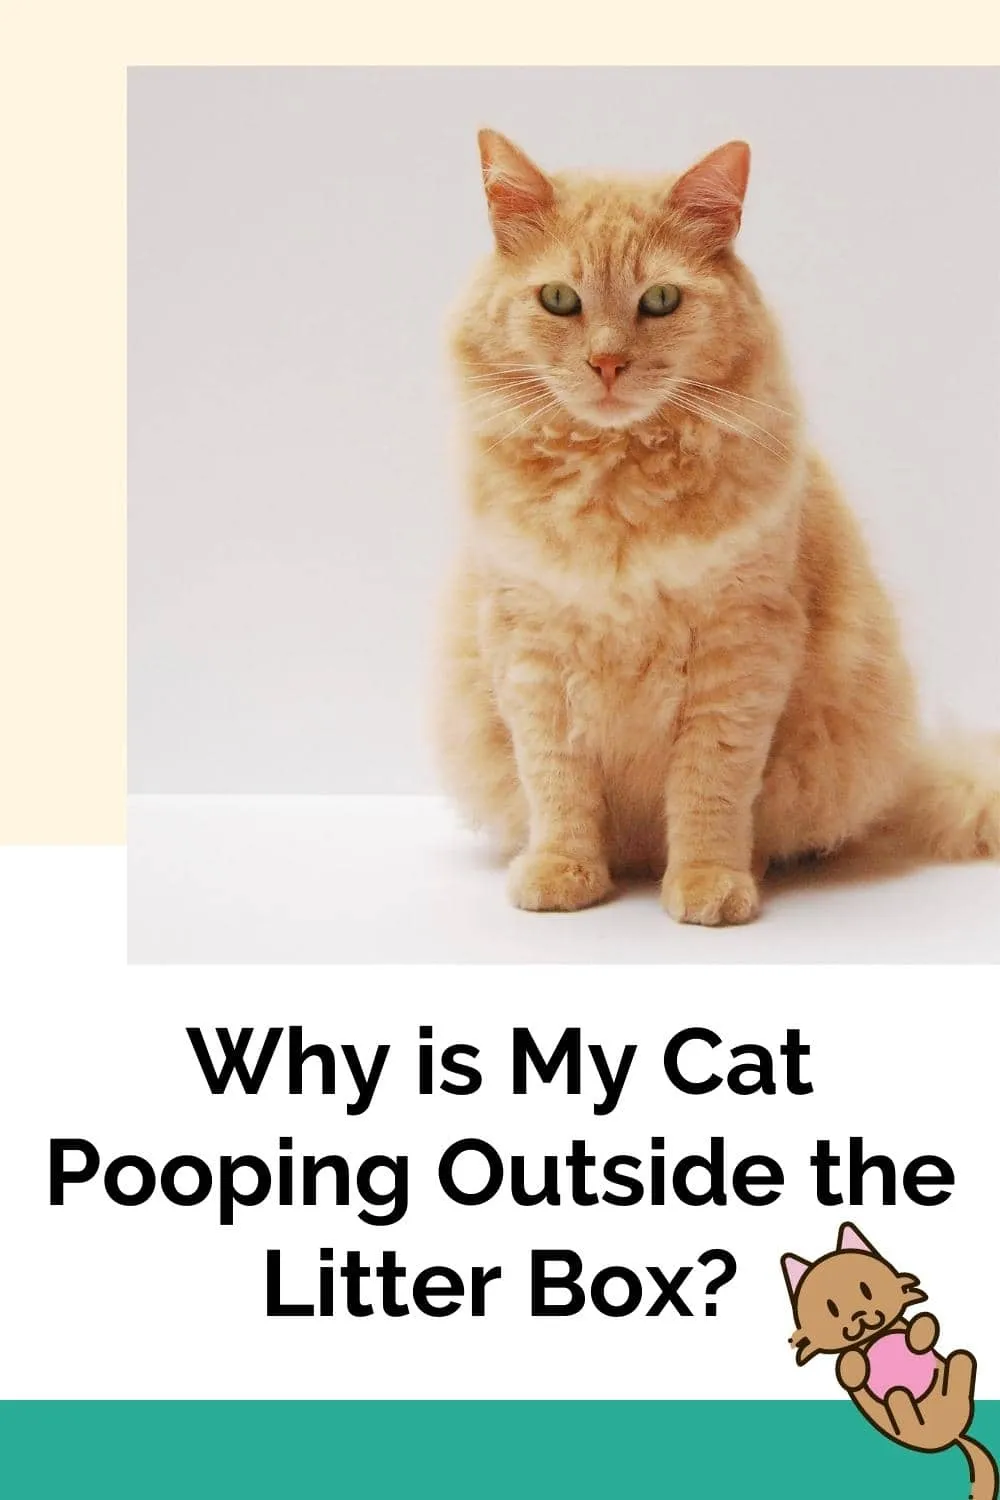 Why is My Cat Pooping Outside the Litter Box